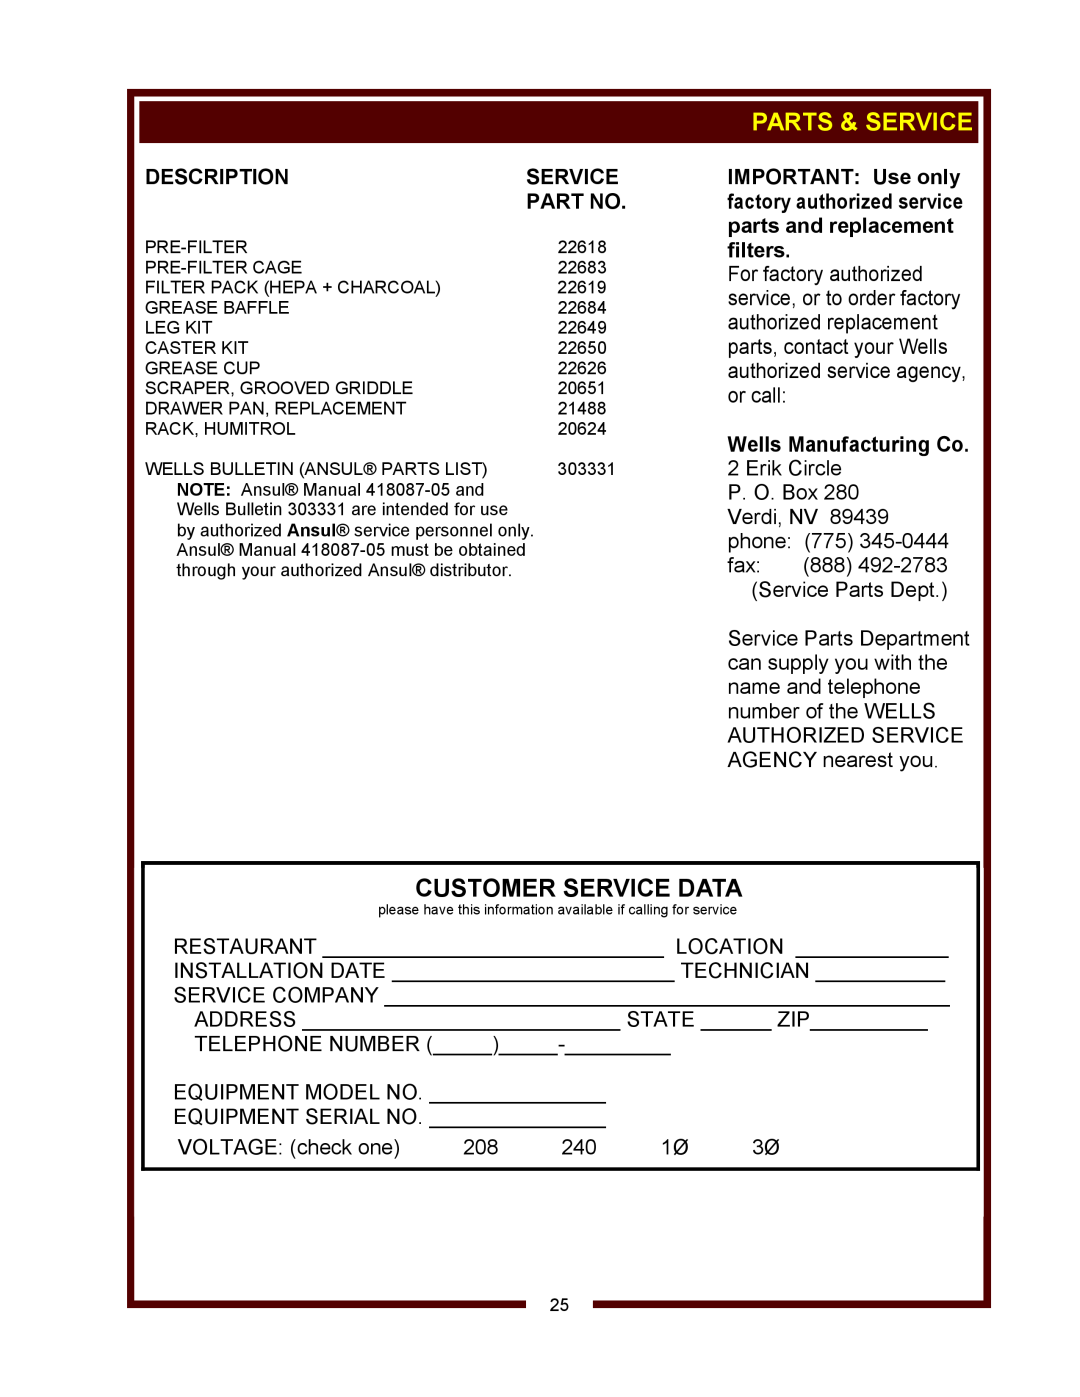 Wells WVG-136, WVG-136RW operation manual Parts & Service, Customer Service Data, Description, Wells Manufacturing Co 